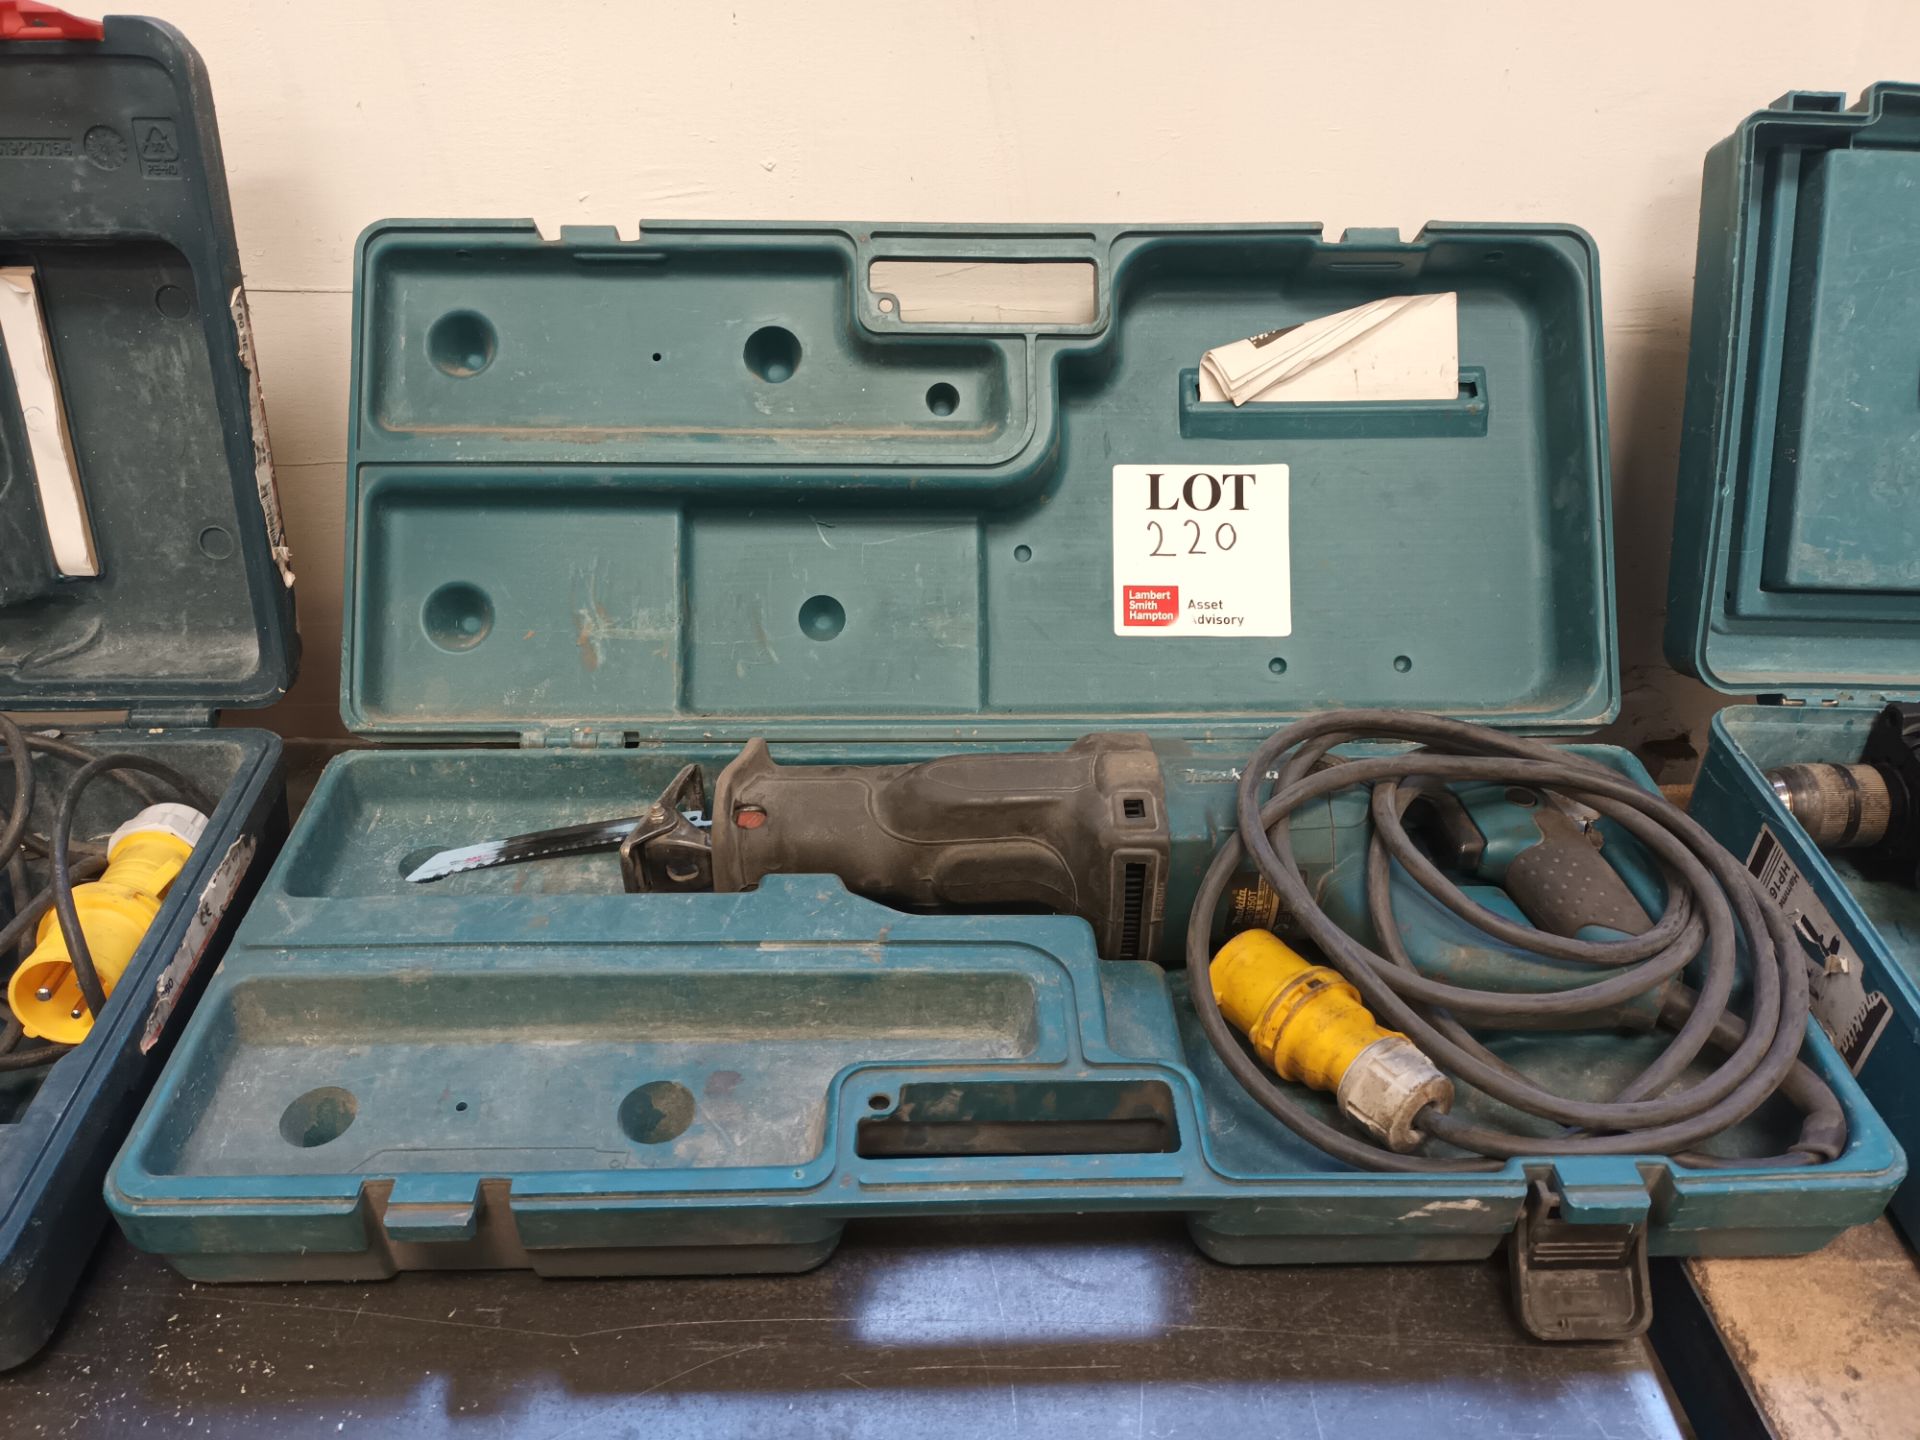 Makita JR3050T 110v reciprocating saw with carry case